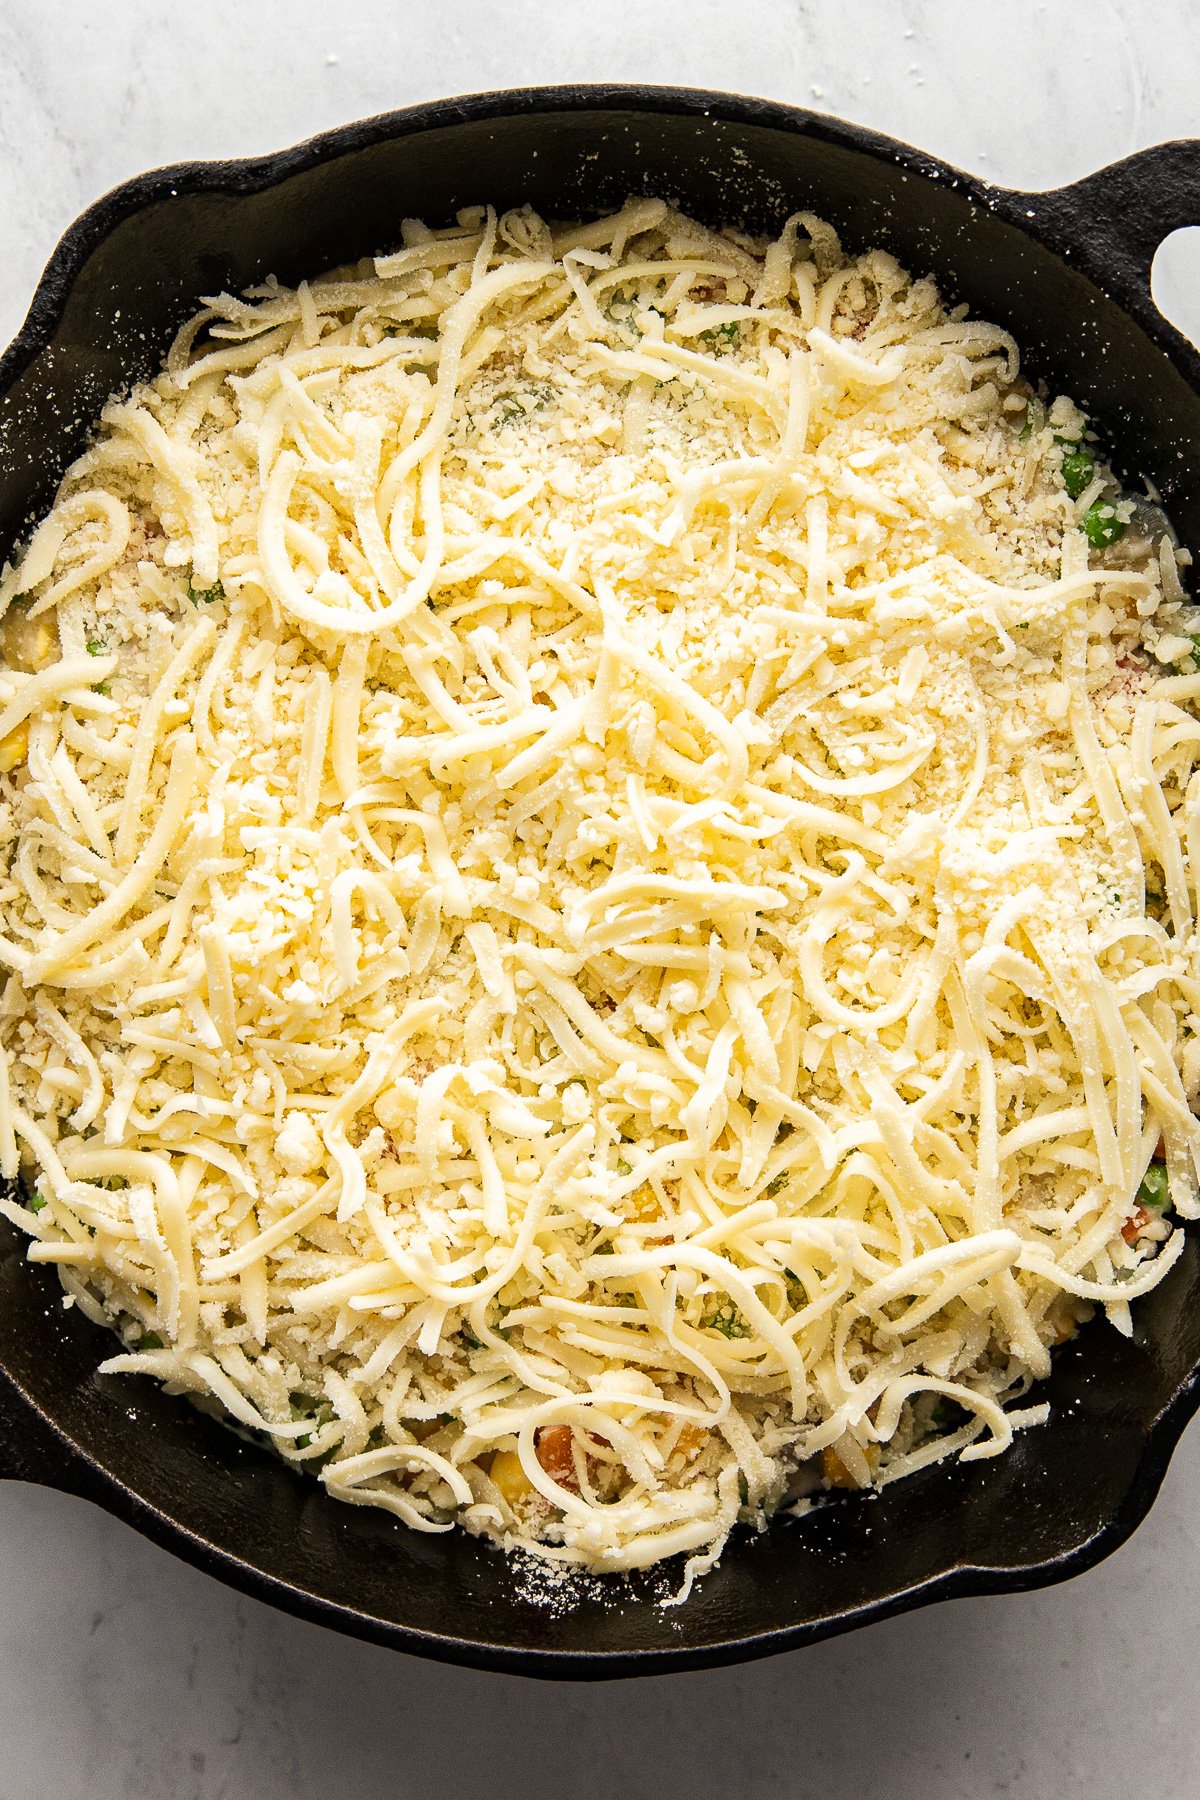 Skillet with shredded cheese on top.